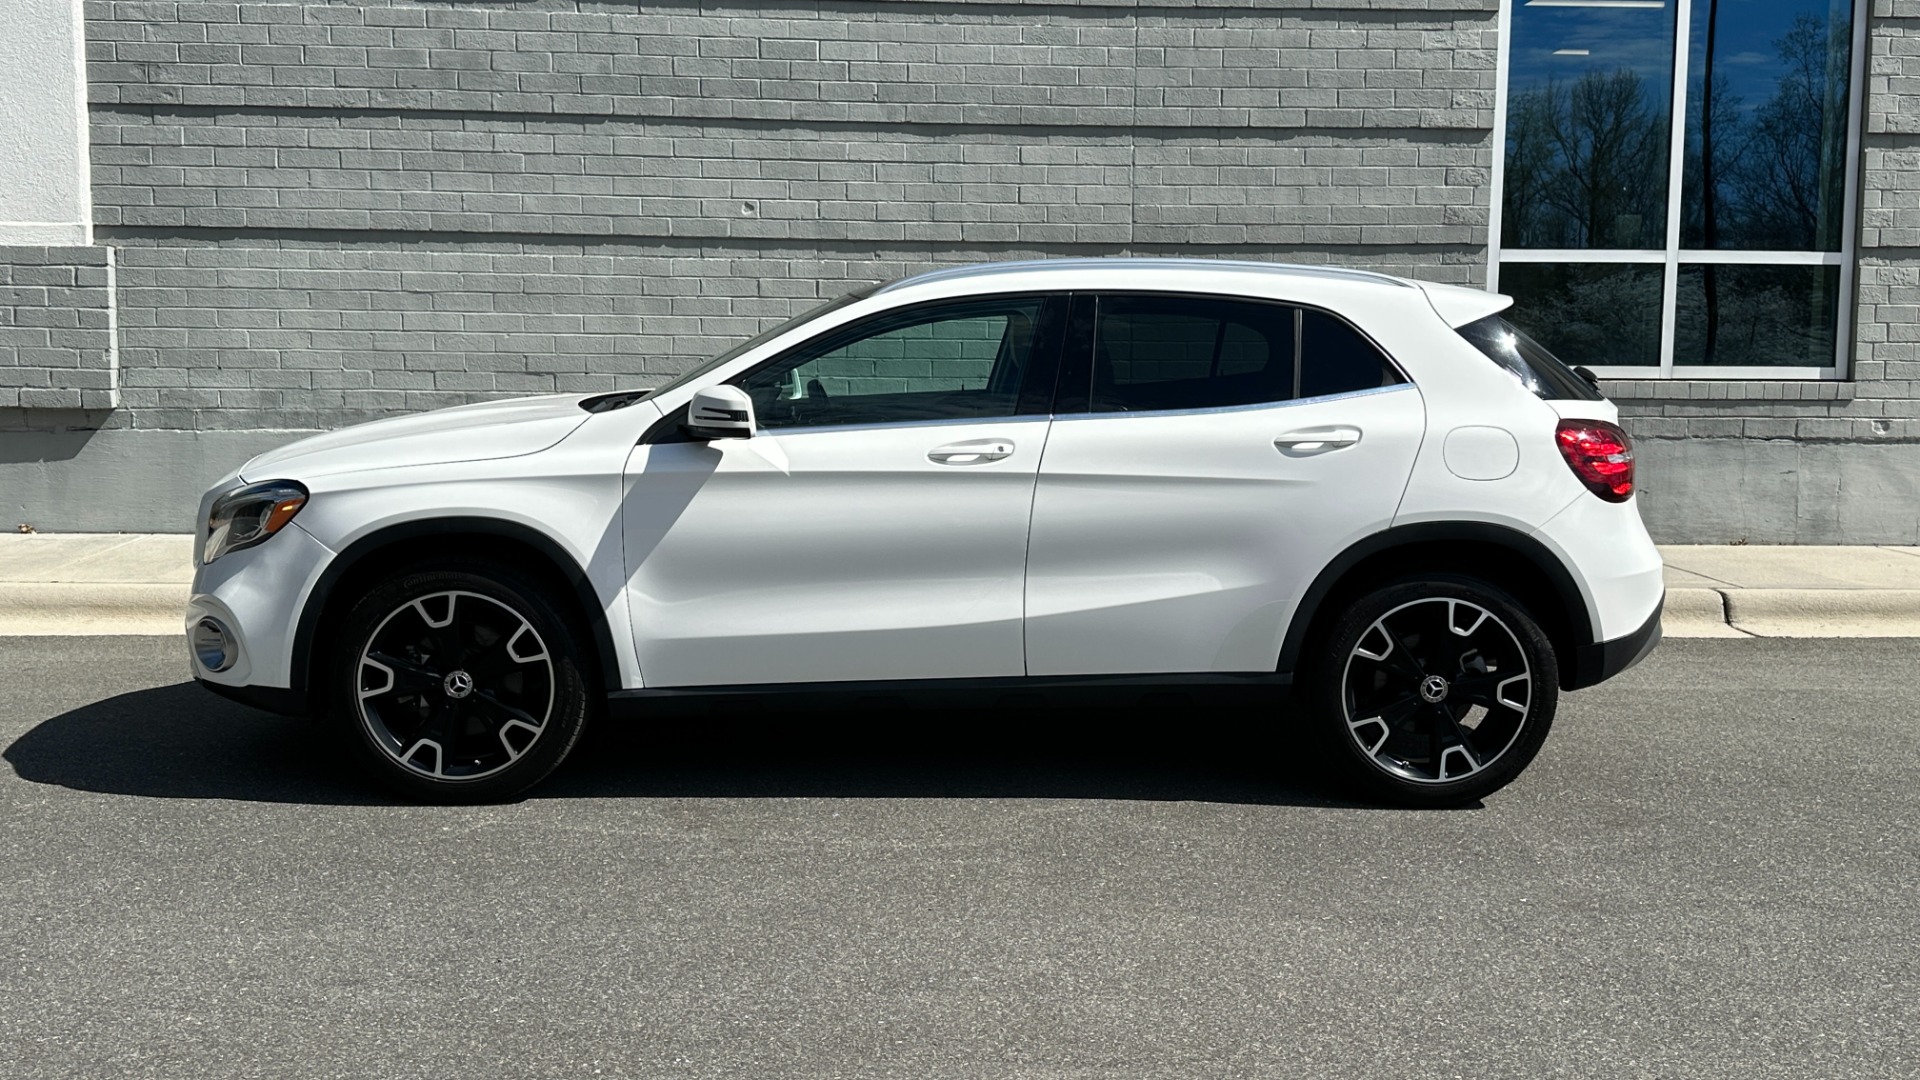 Used 2019 Mercedes-Benz GLA GLA 250 / BLIND SPOT / PANORAMIC ROOF / AMBIENT LIGHTING / CONVENIENCE PKG for sale Sold at Formula Imports in Charlotte NC 28227 3